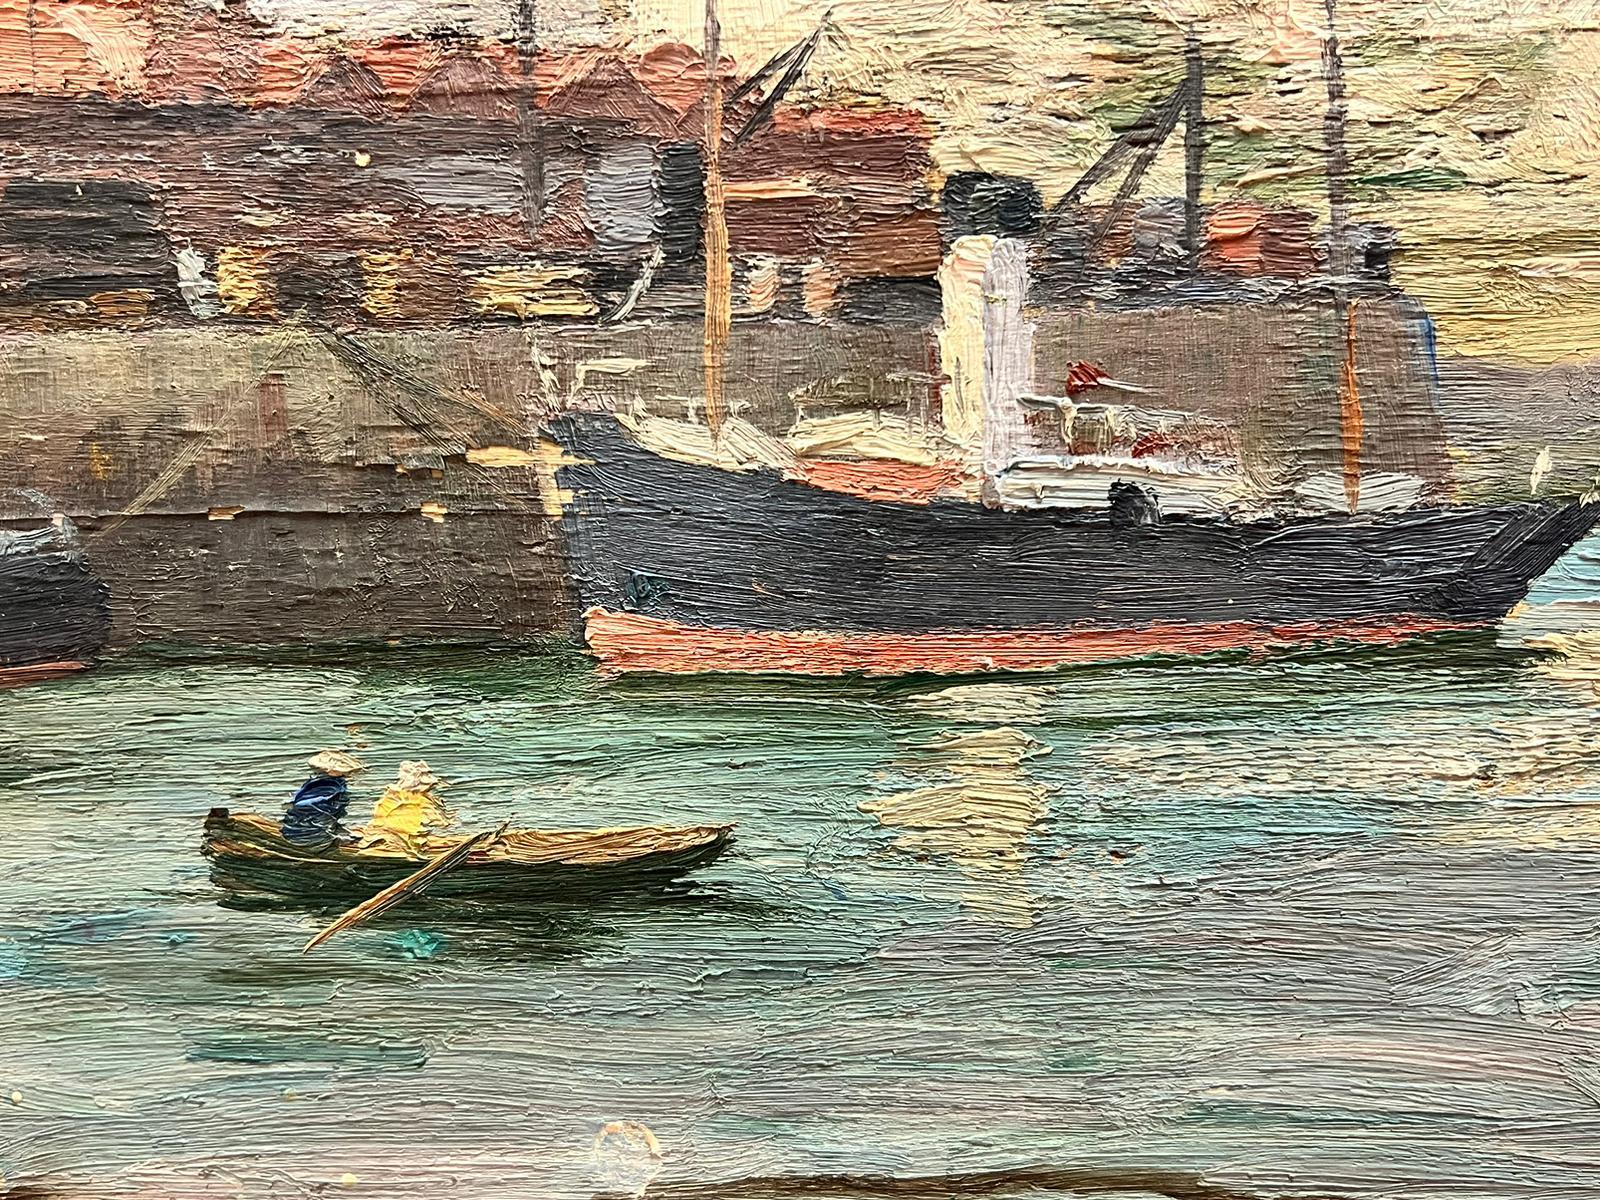 Artist/ School: Suzanne Crochet (French c. 1930) French Impressionist artist

Title: Boats in the Harbour 

Medium: oil on board, unframed and double sided image

board: 9.5 x 13 inches

Provenance: private collection, France

Condition: The